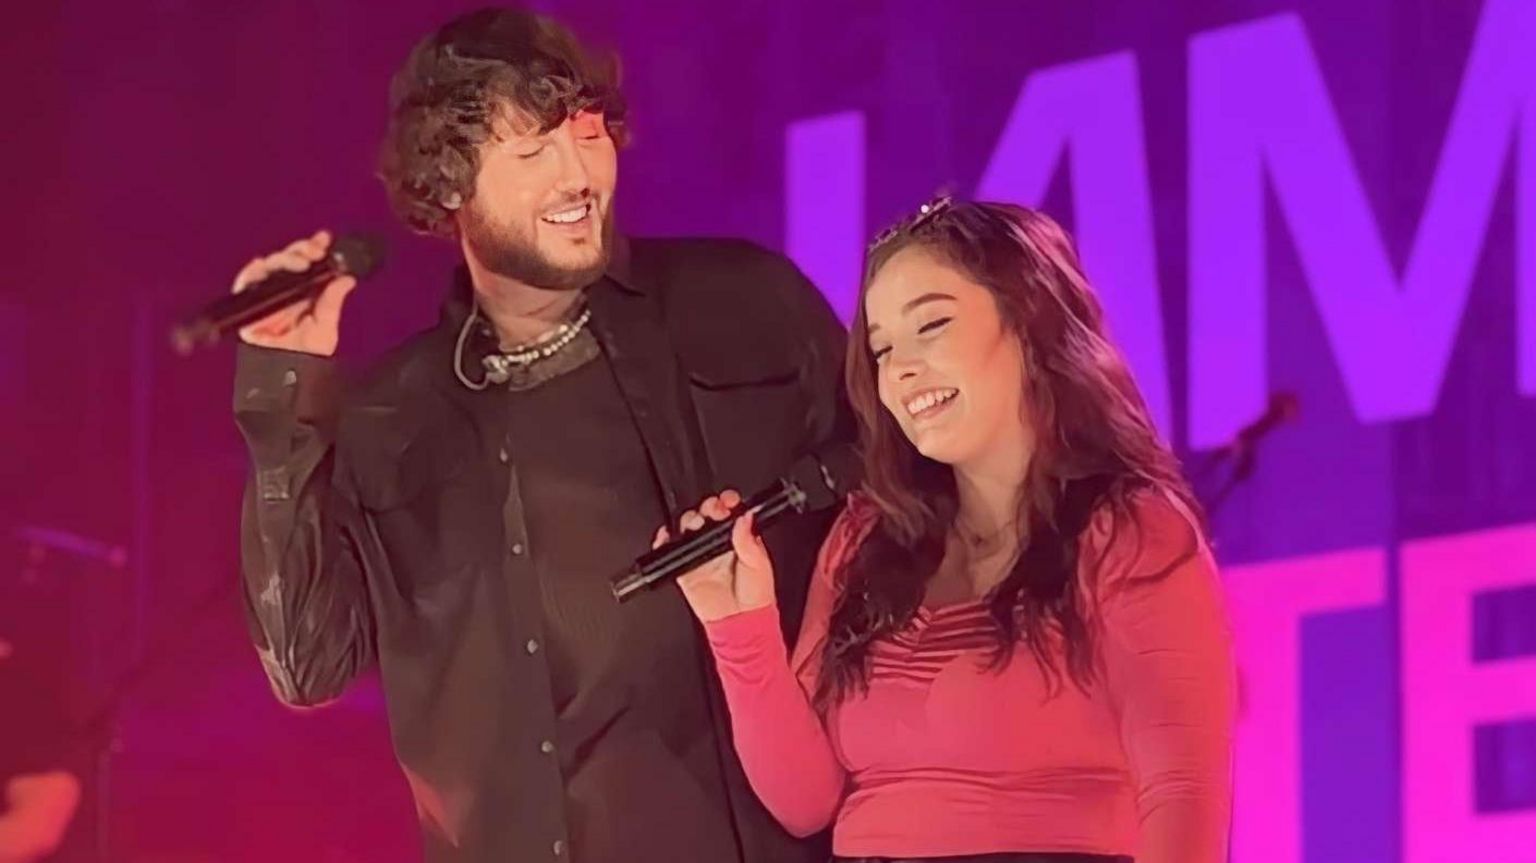 Milly Kirk on stage with James Arthur